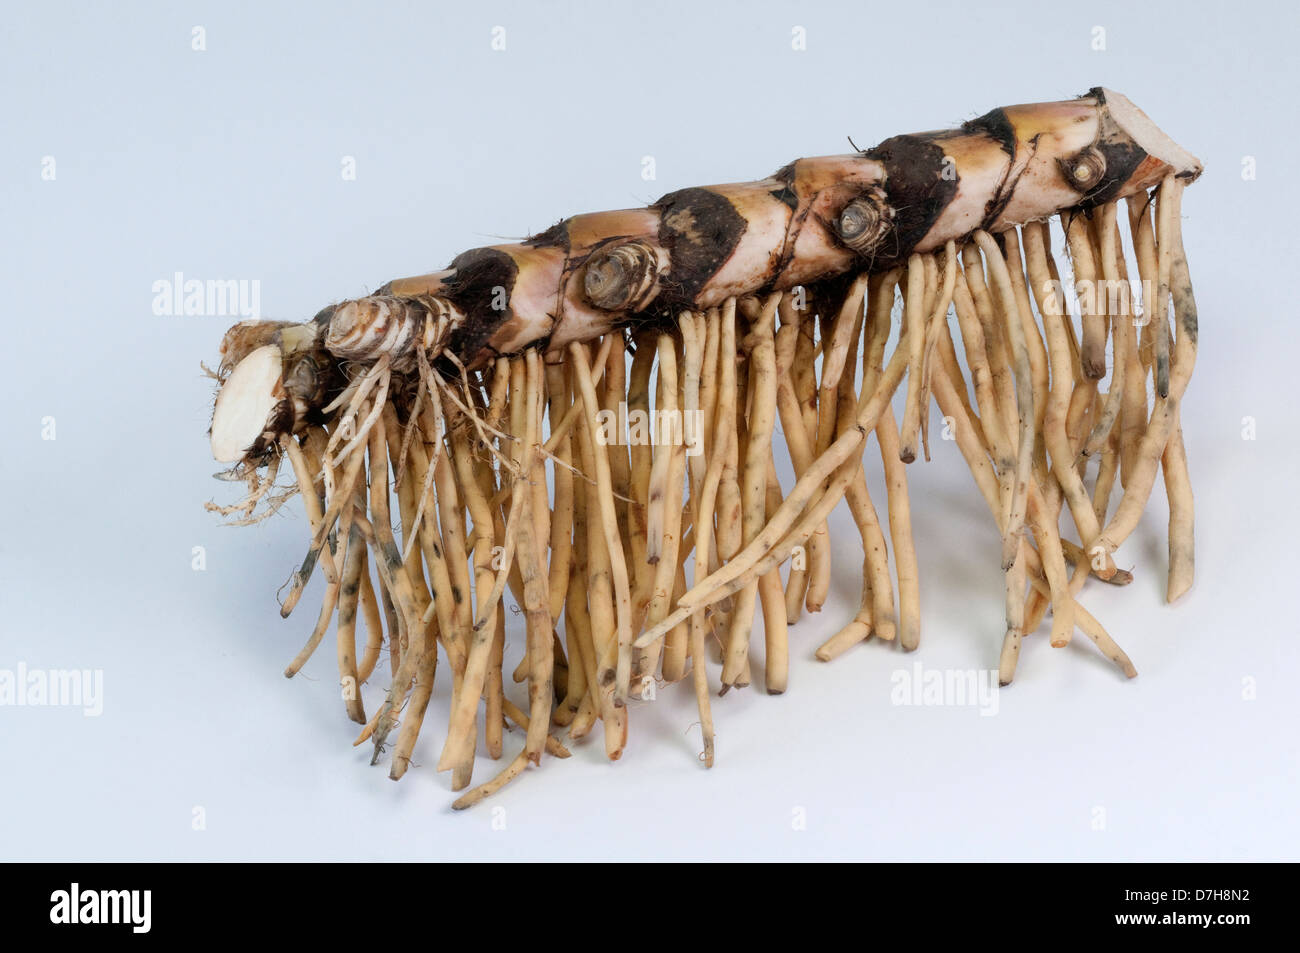 Calamus Flag Root Sweet Myrtle Acorus calamus Part of rhizome with absorbing roots Studio picture against white background Stock Photo